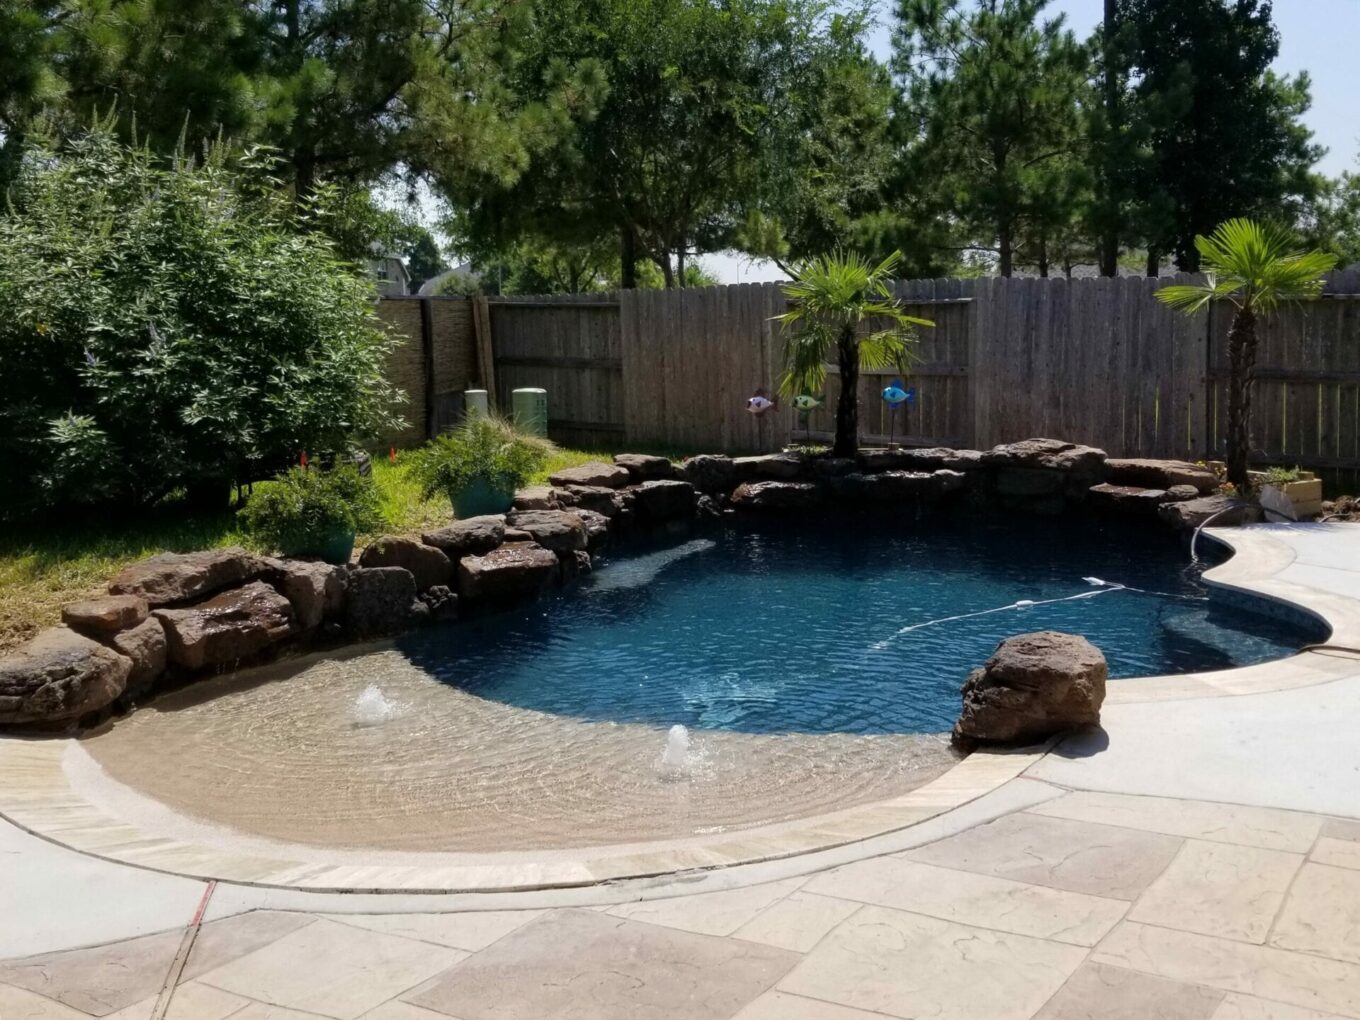 A pool with rocks and plants in the back yard